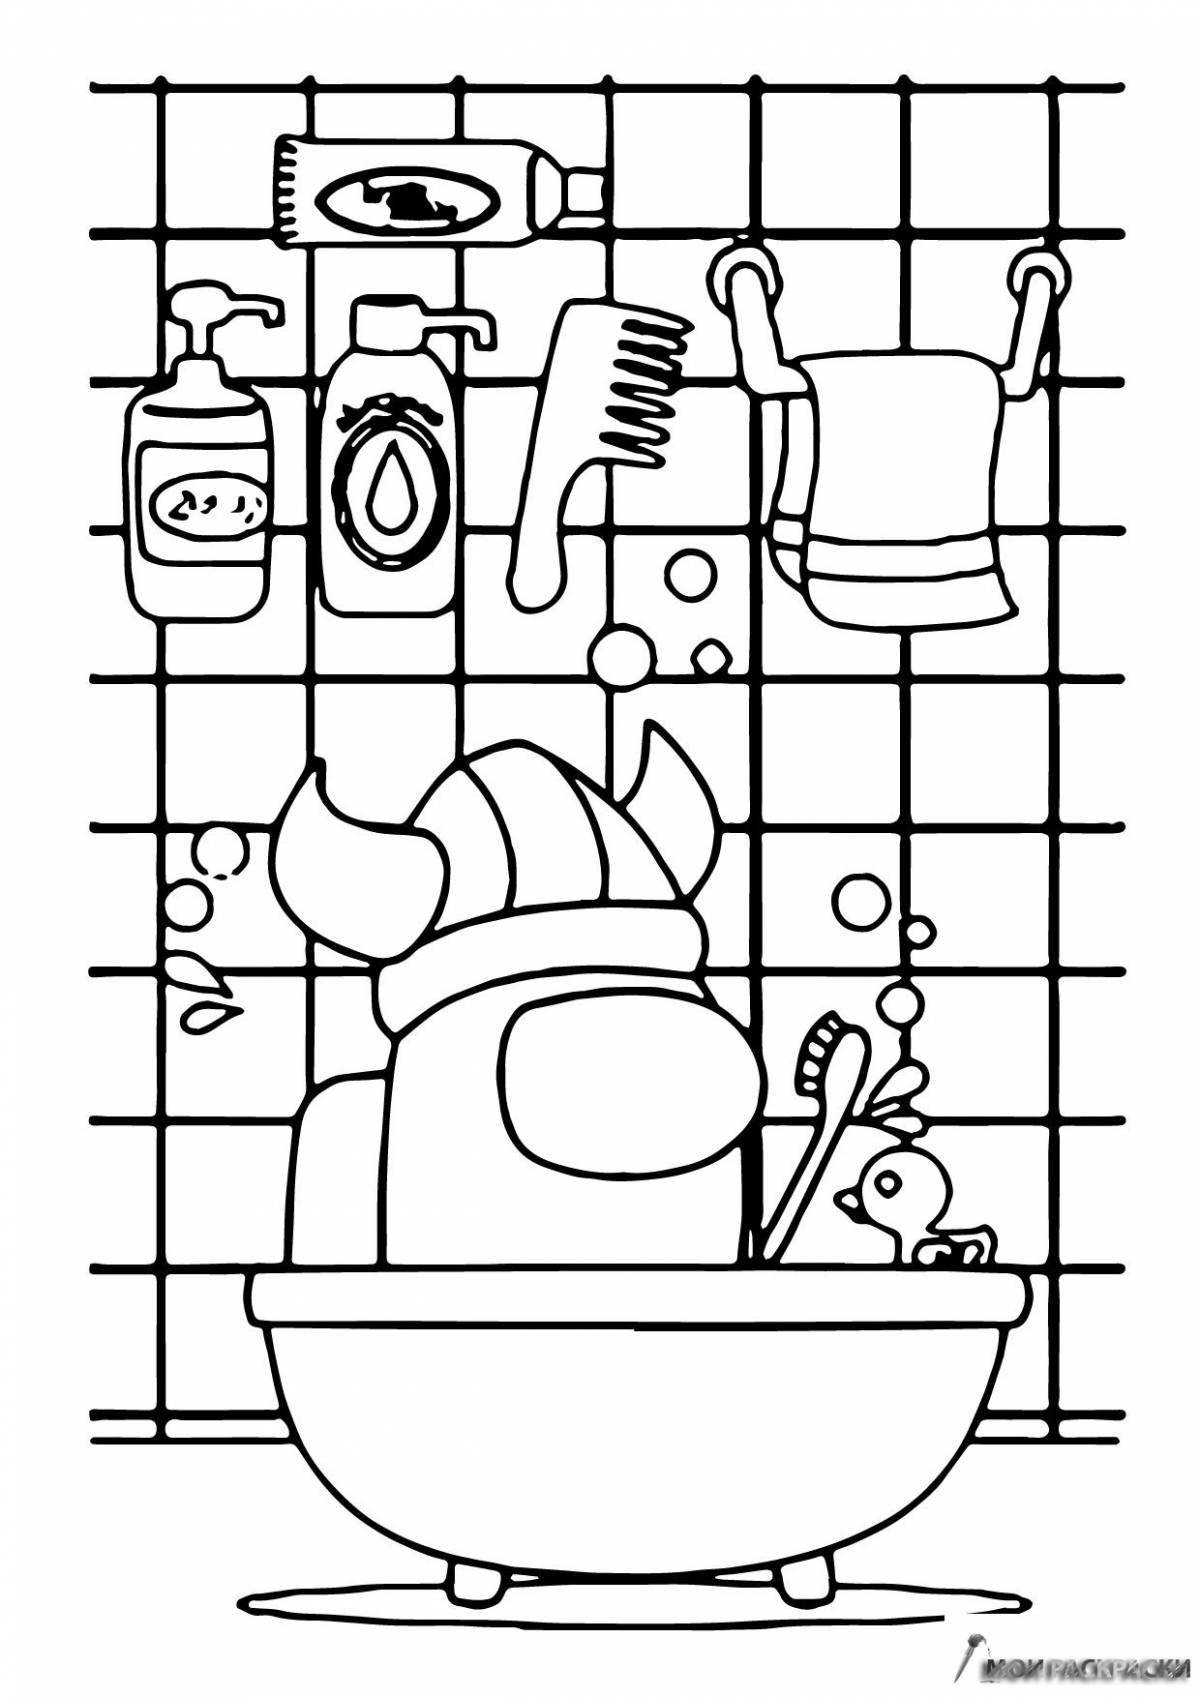 Cute side bath coloring page